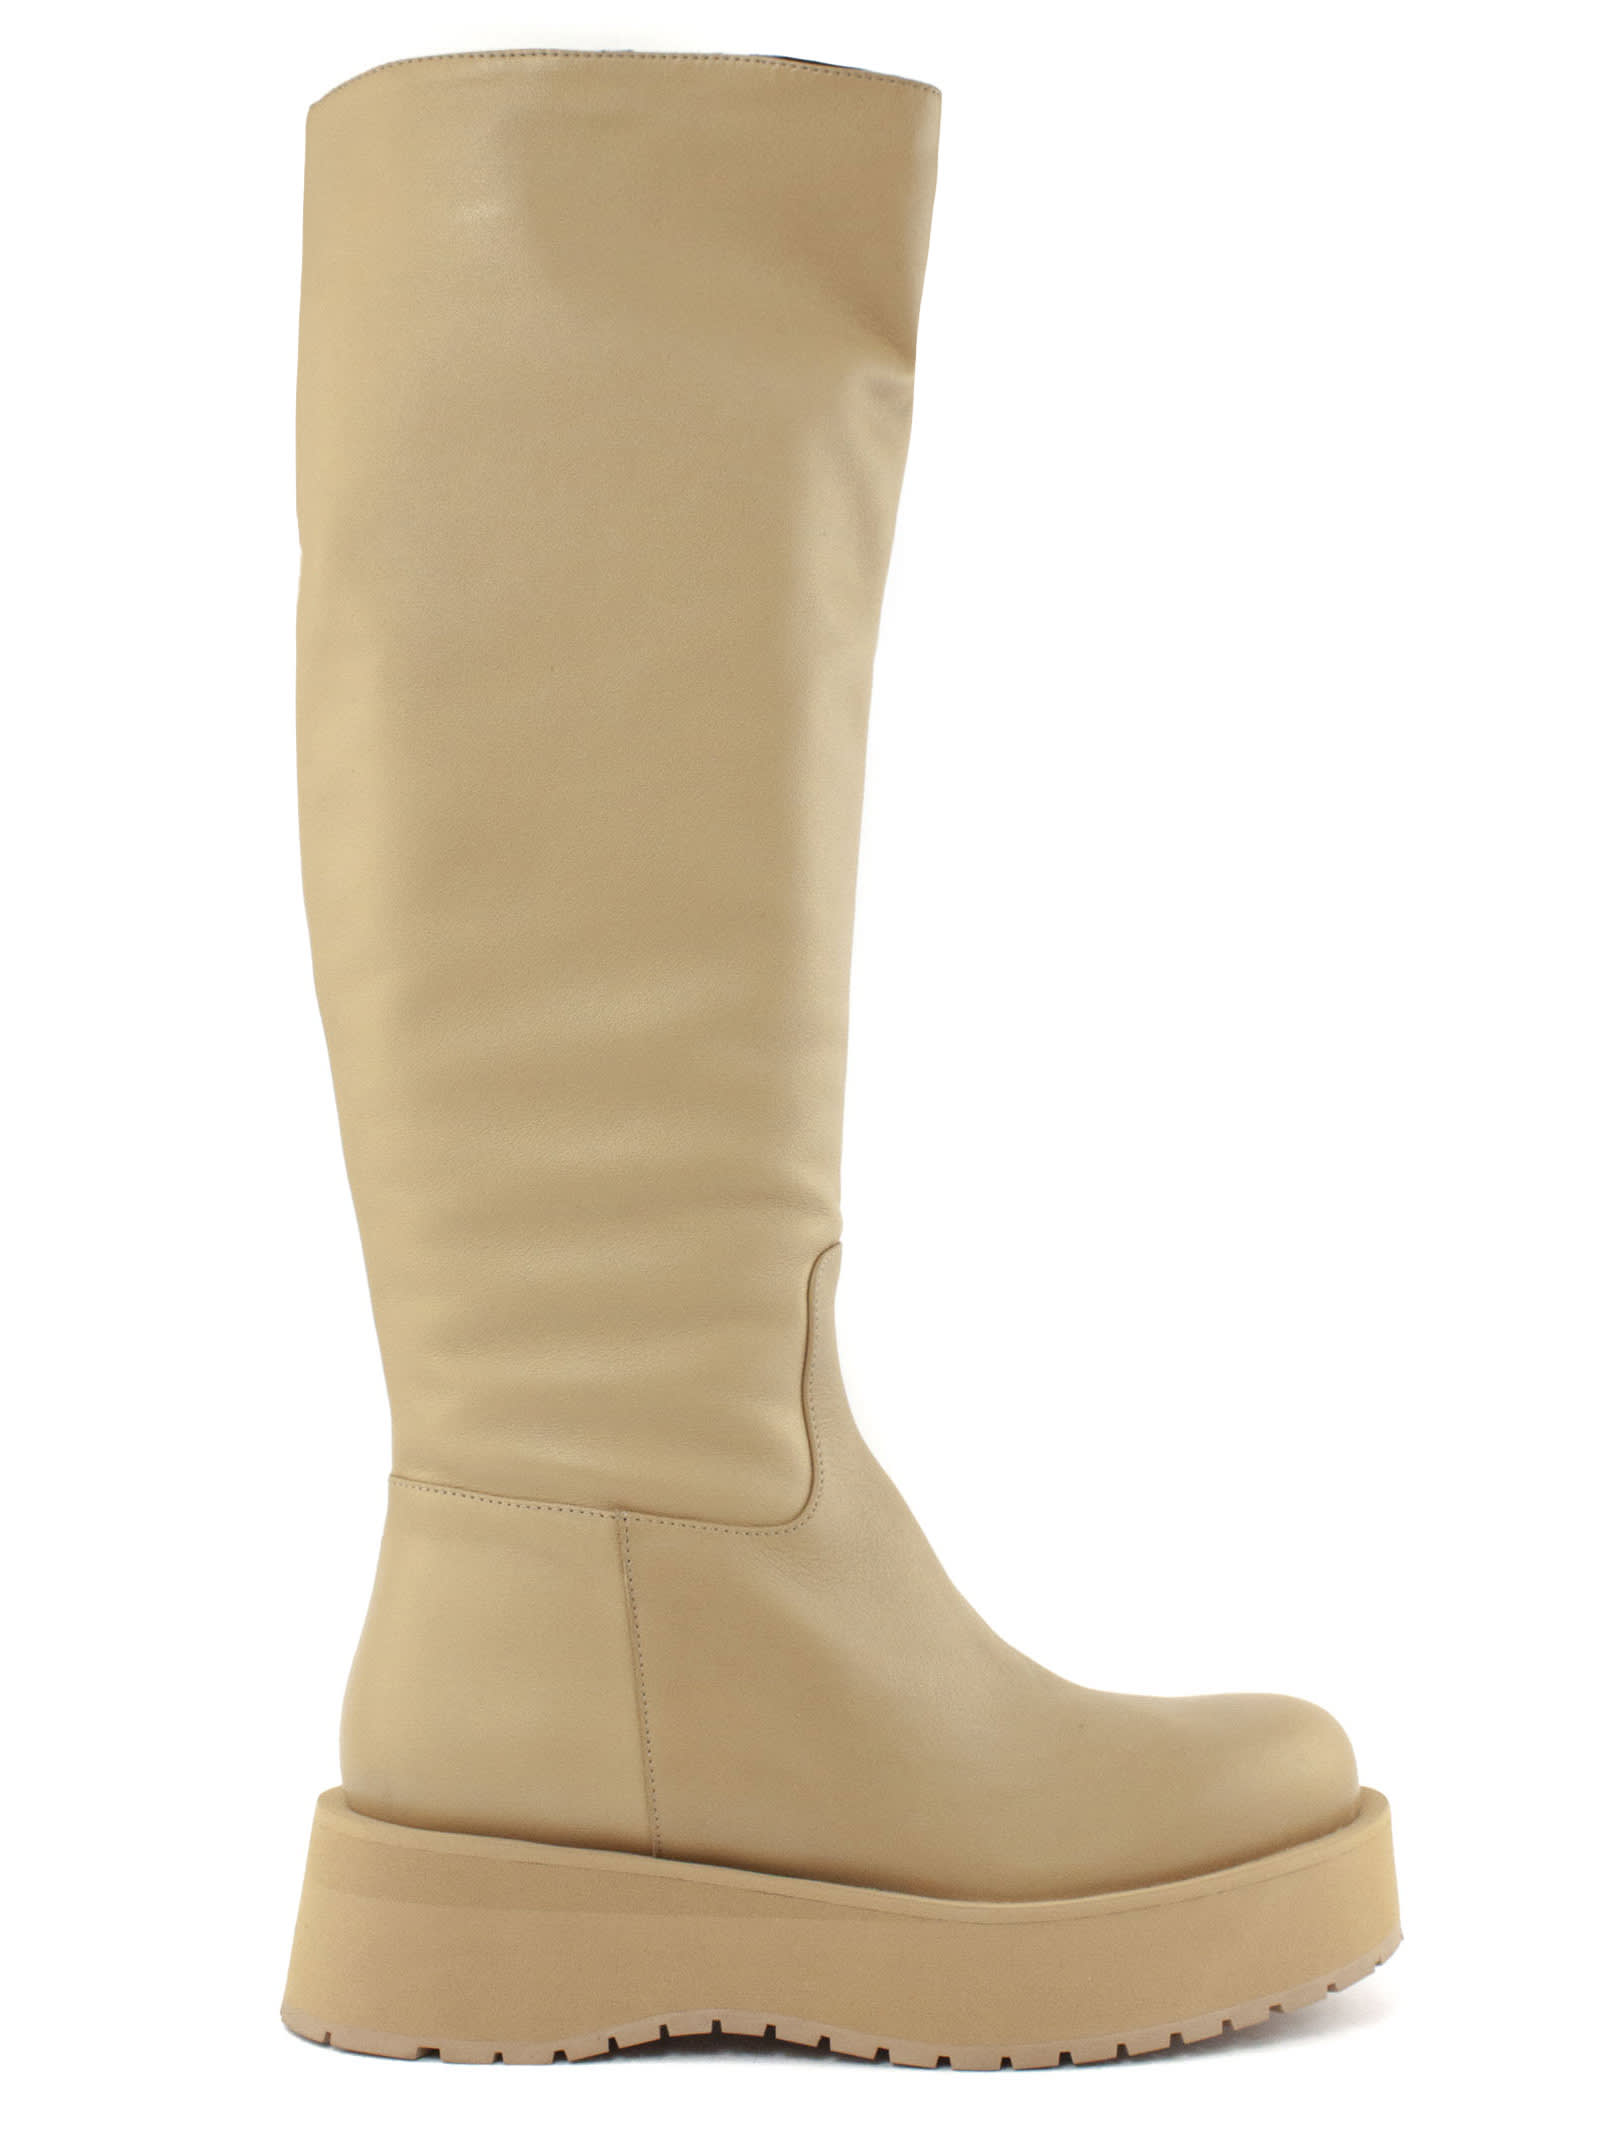 Paloma Barceló Beige Leather Gema Knee-high Boots